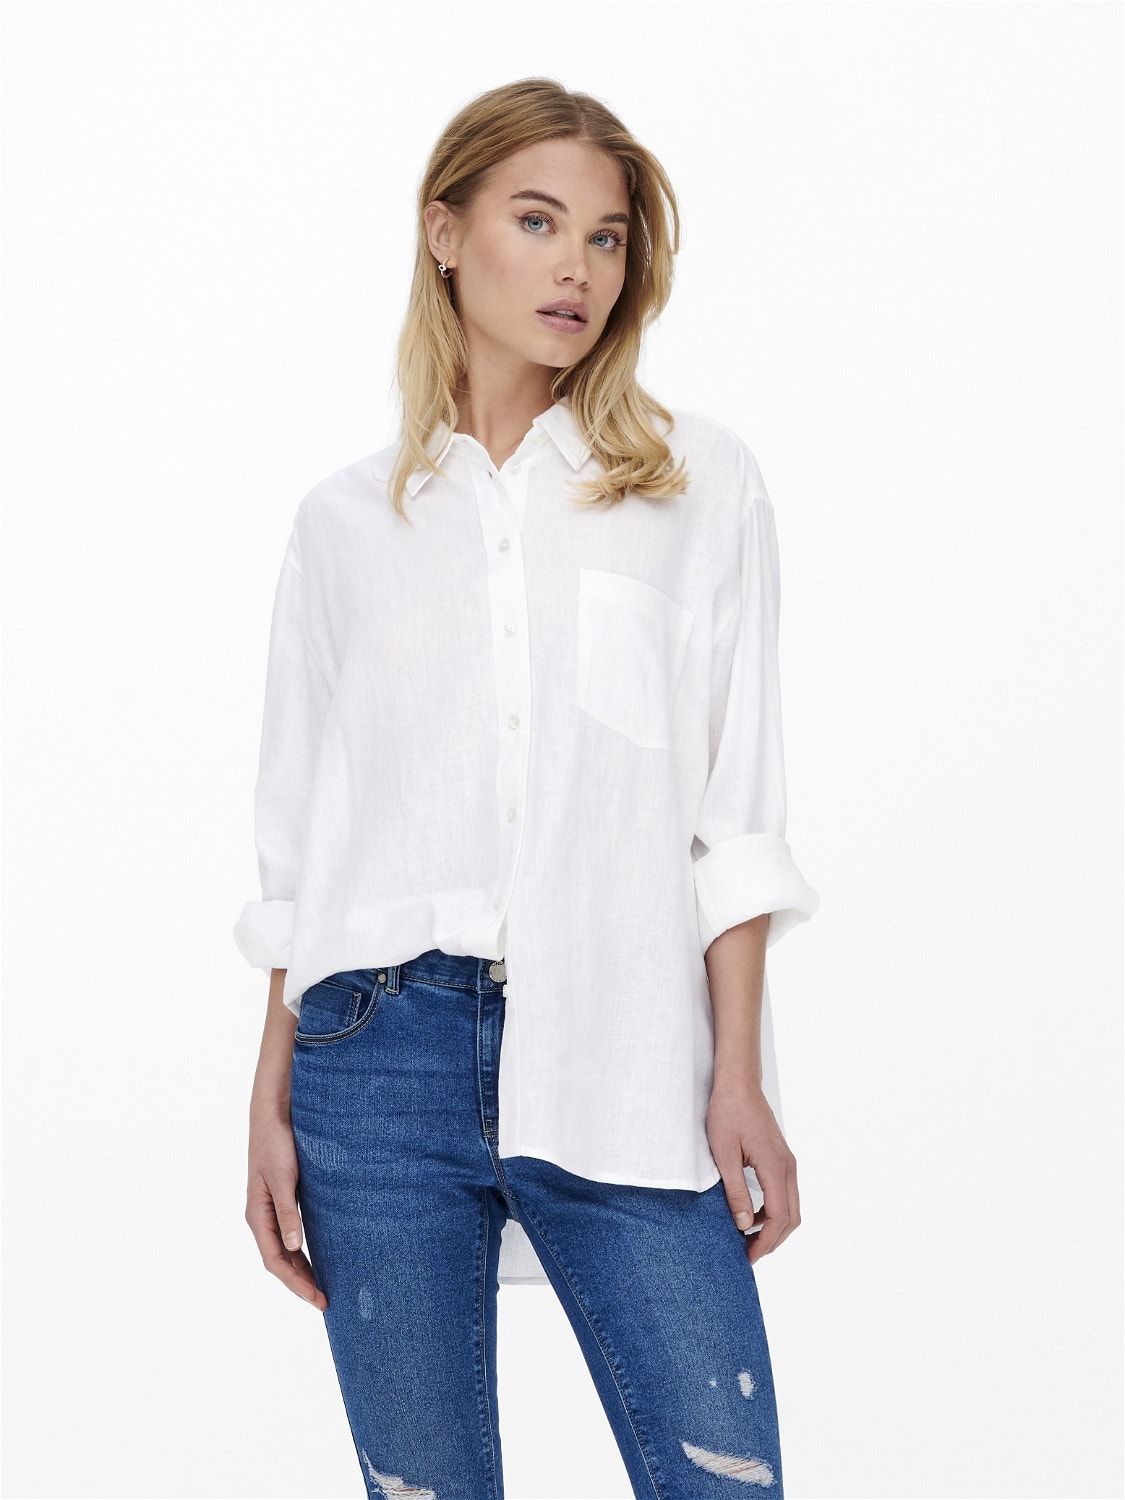 ONLY Solid colored linen blend Shirt -Bright White - 15259585